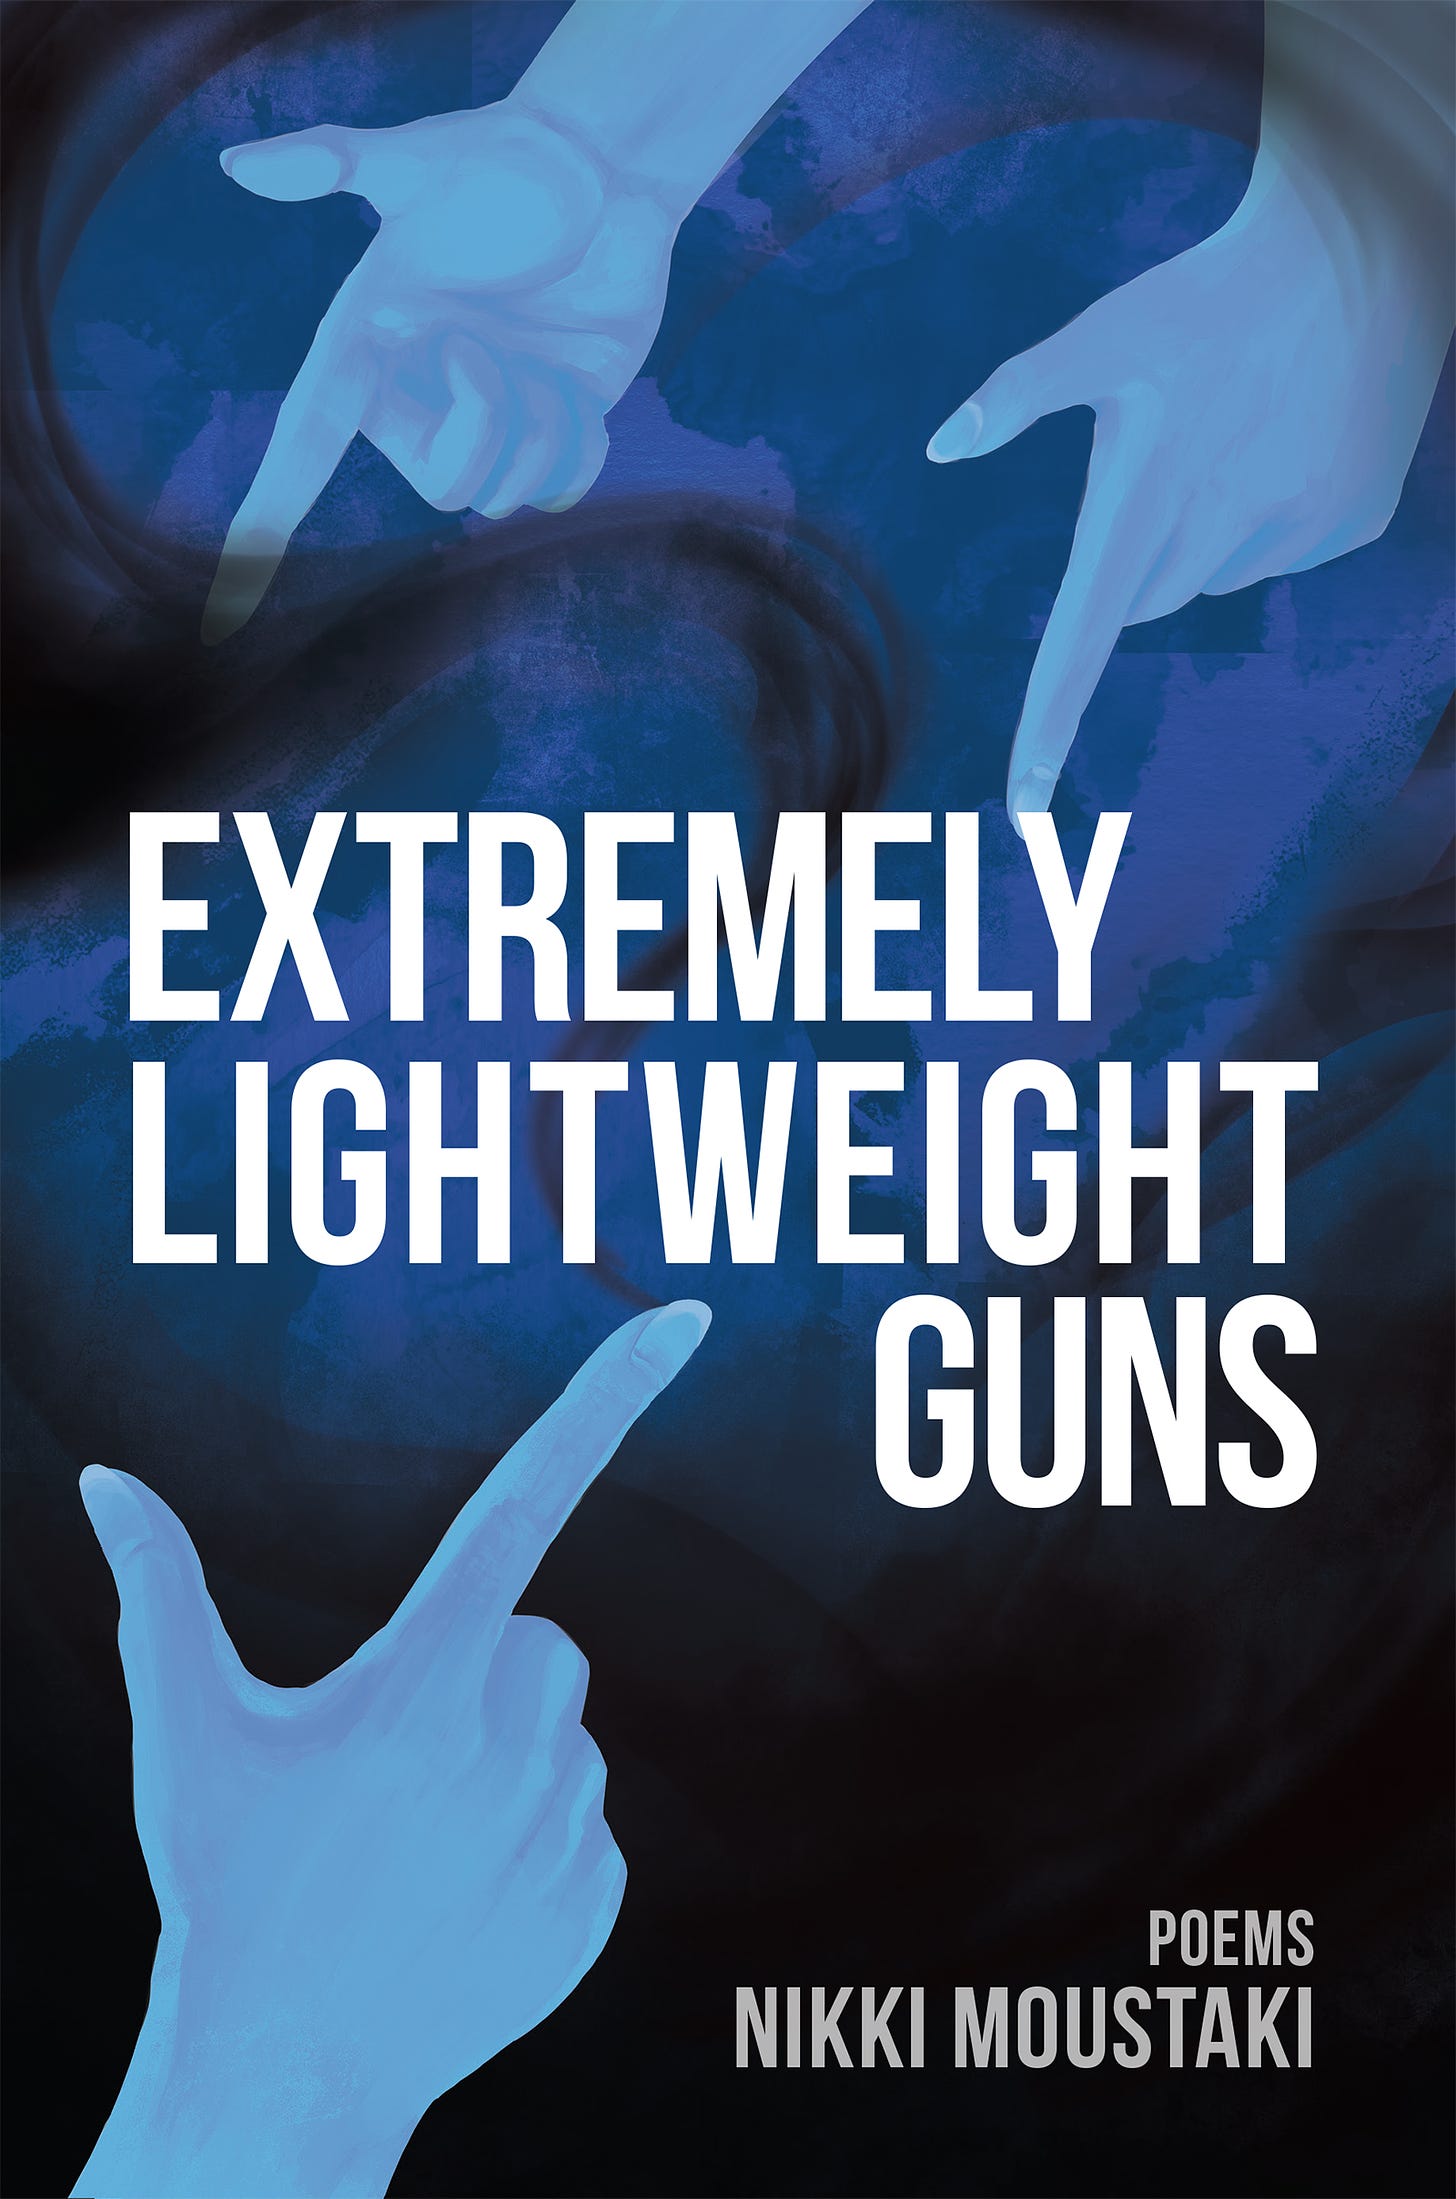 This is the book cover for Extremely Lightweight Guns by Nikki Moustaki